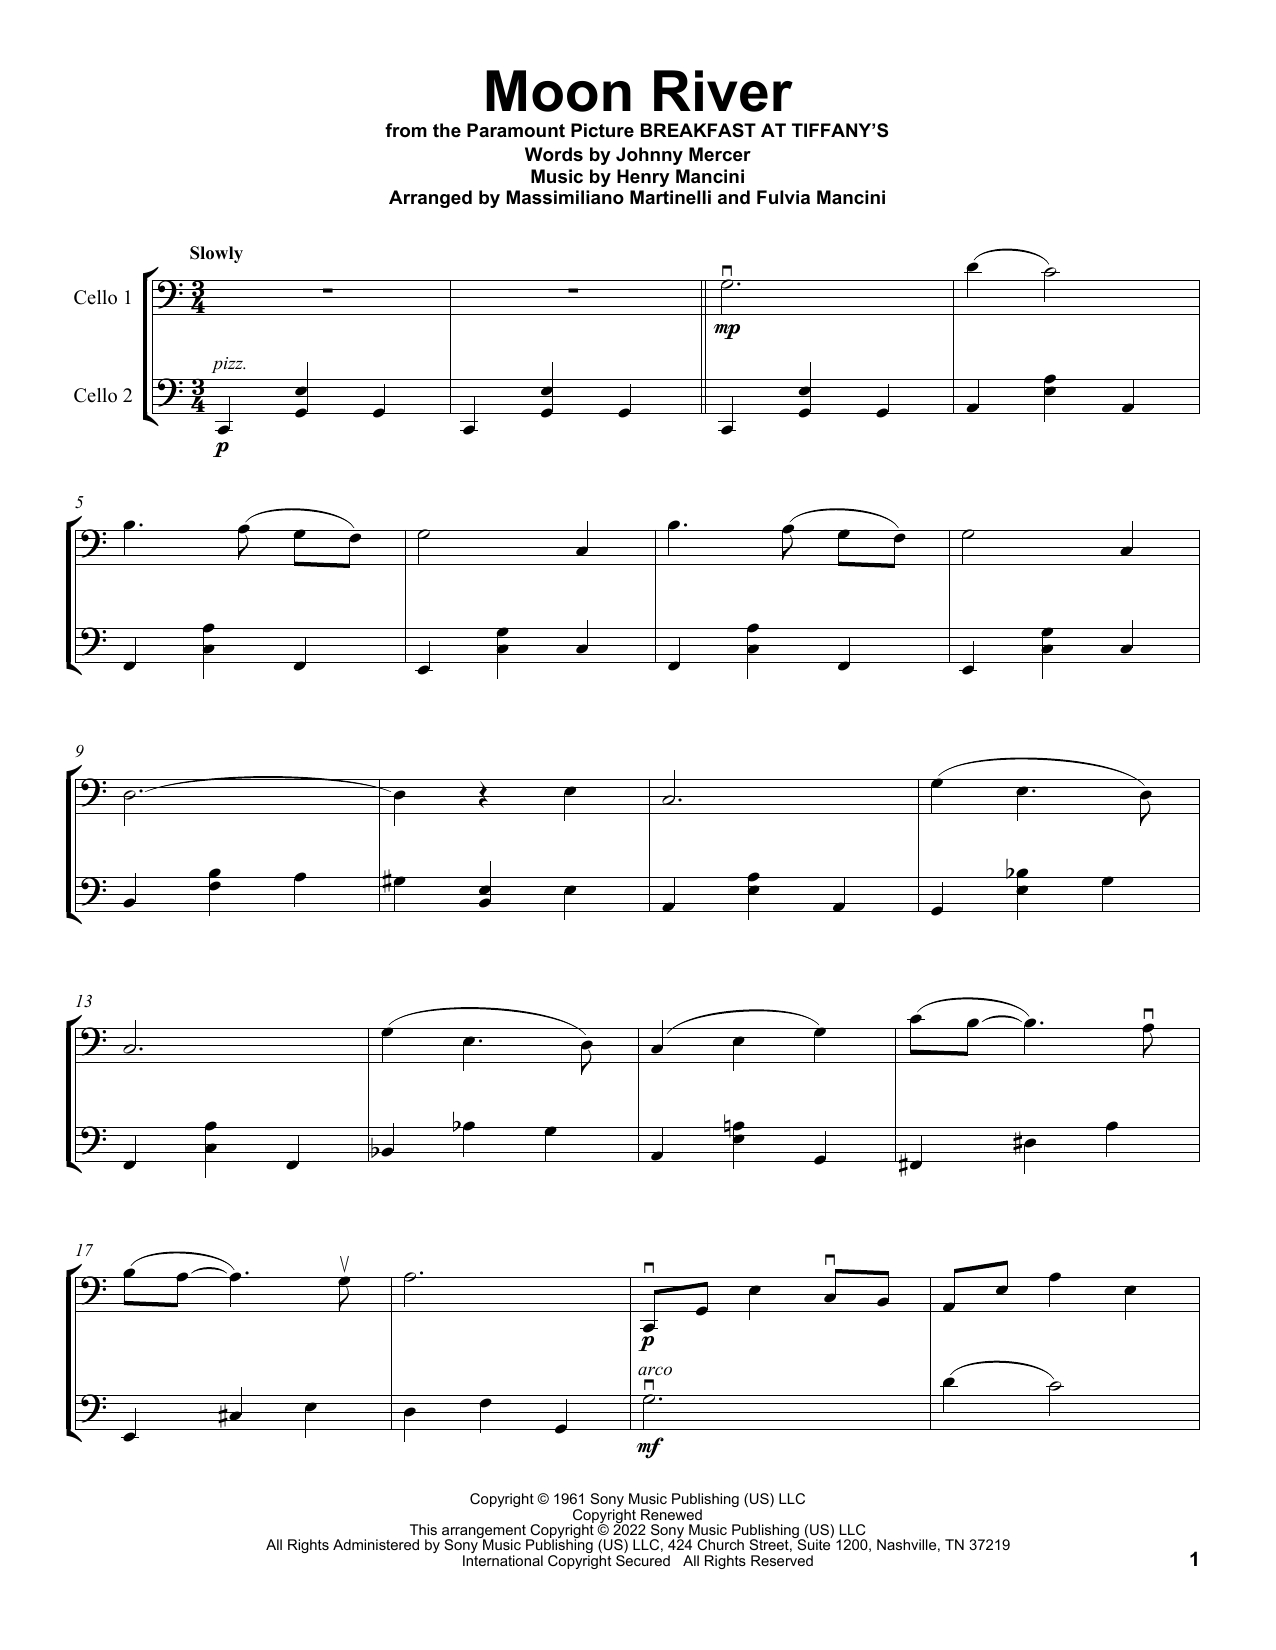 Download Mr & Mrs Cello Moon River Sheet Music